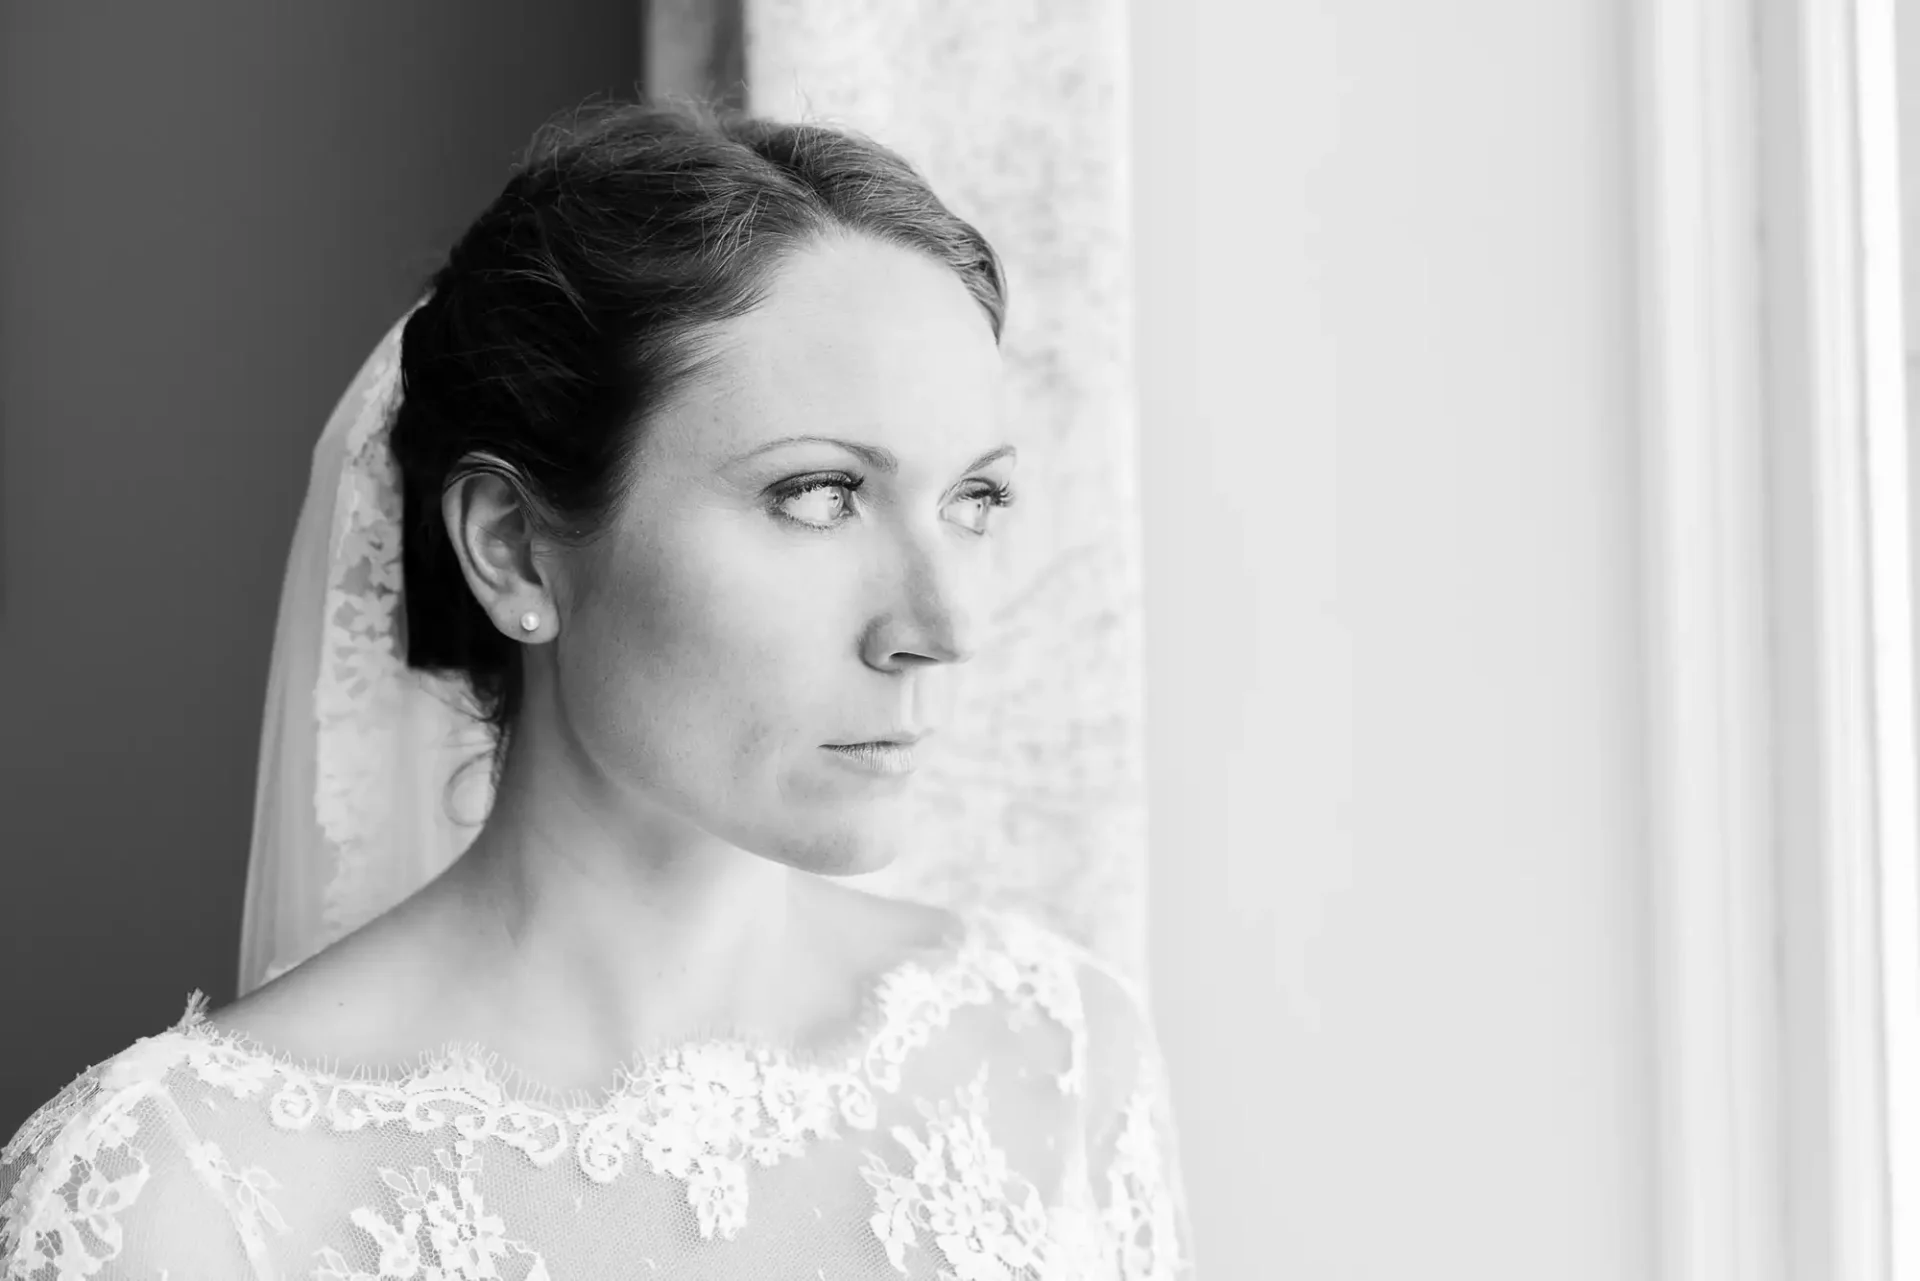 A bride in a lace dress looking out a window in a thoughtful pose, captured in black and white.